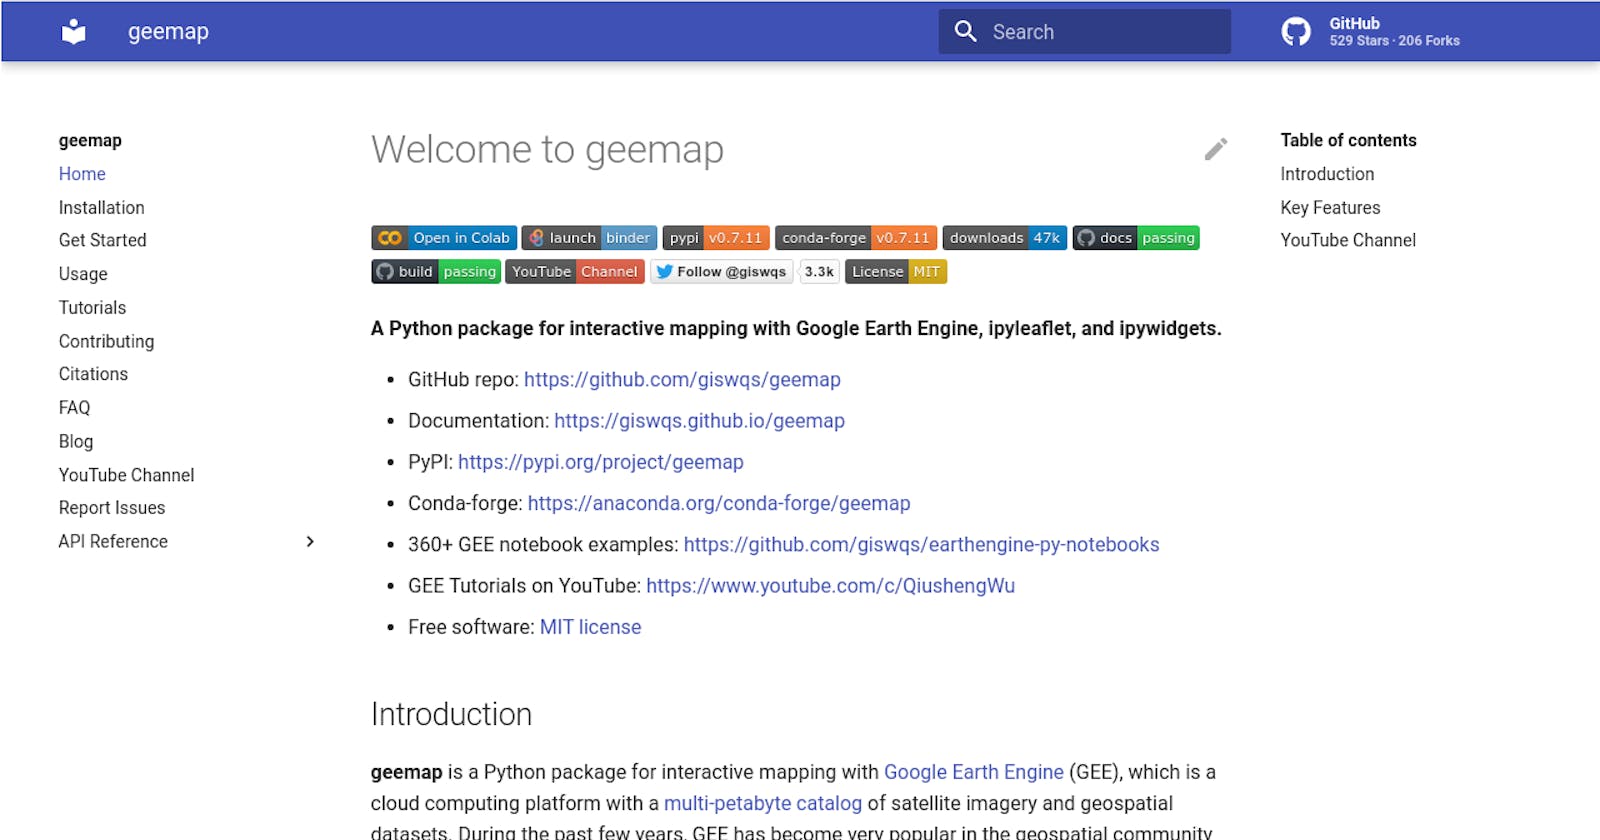 New website for geemap user guide and API reference